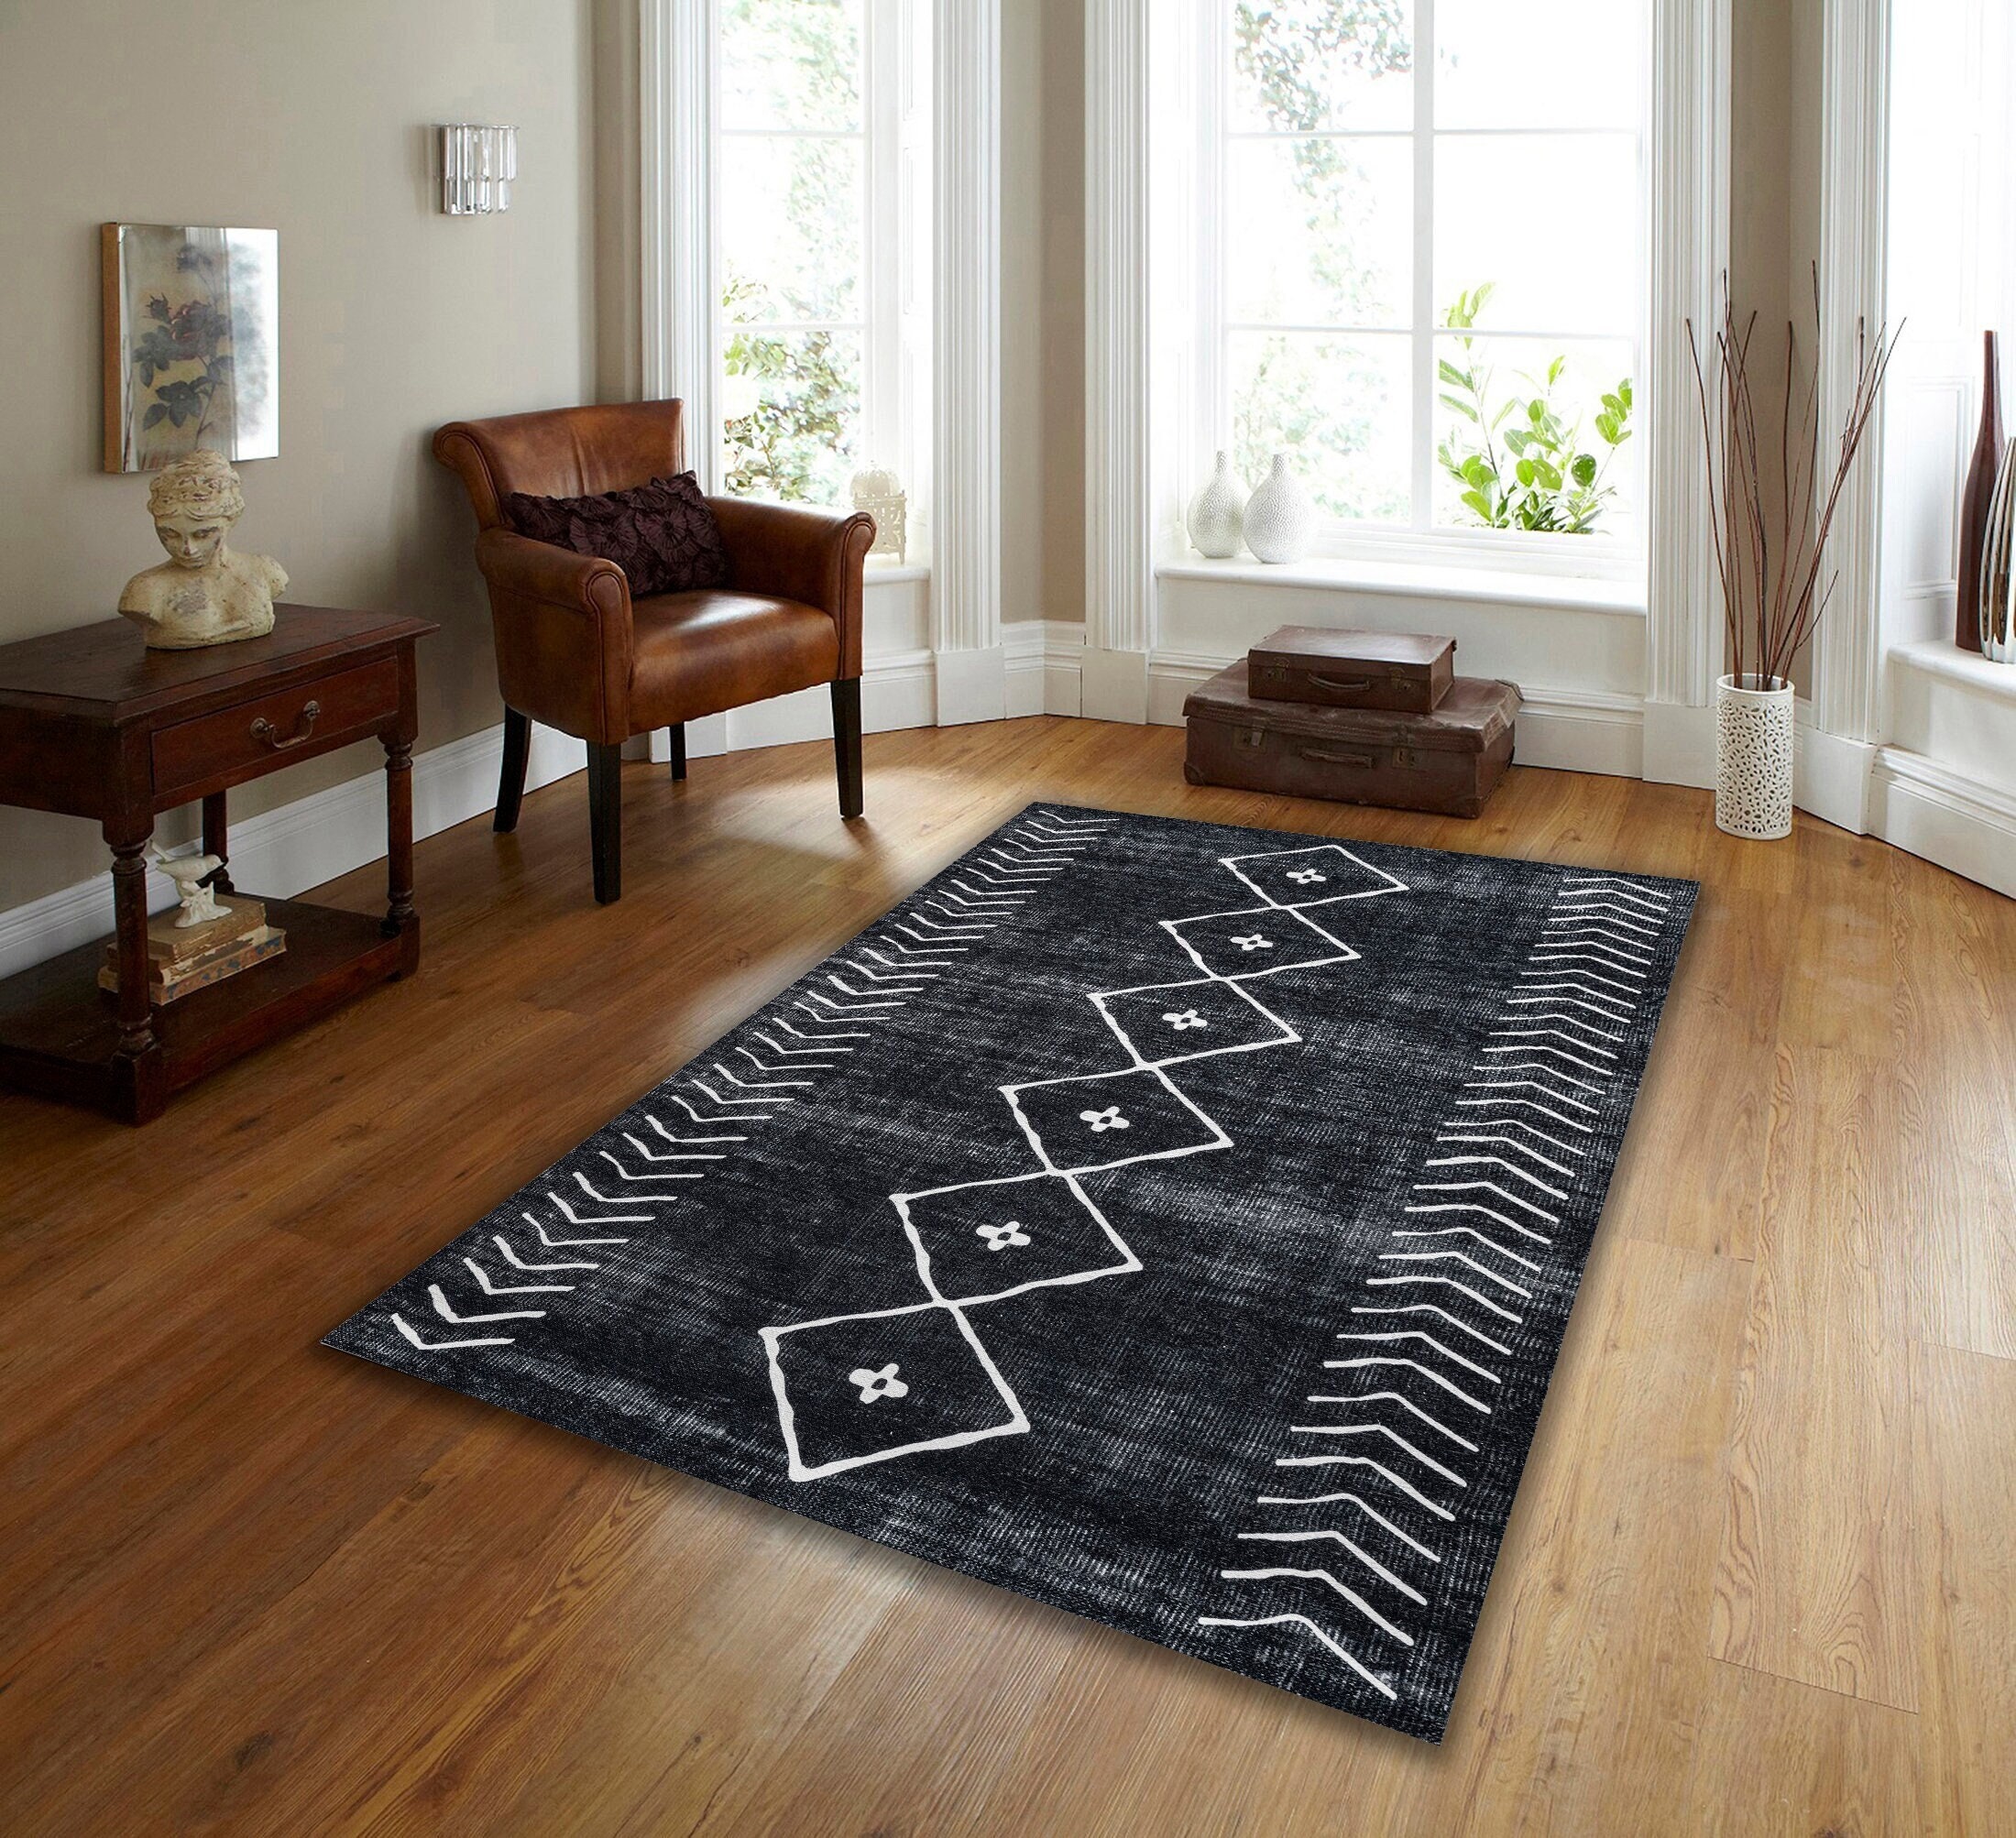 MCOW Area Rugs for Living Room 4x6 Machine Washable Bedroom Rugs Distressed  Vintage Print Gray Large Throw Rug Dining Room Aesthetic, Non Slip Carpet  with Gripper 